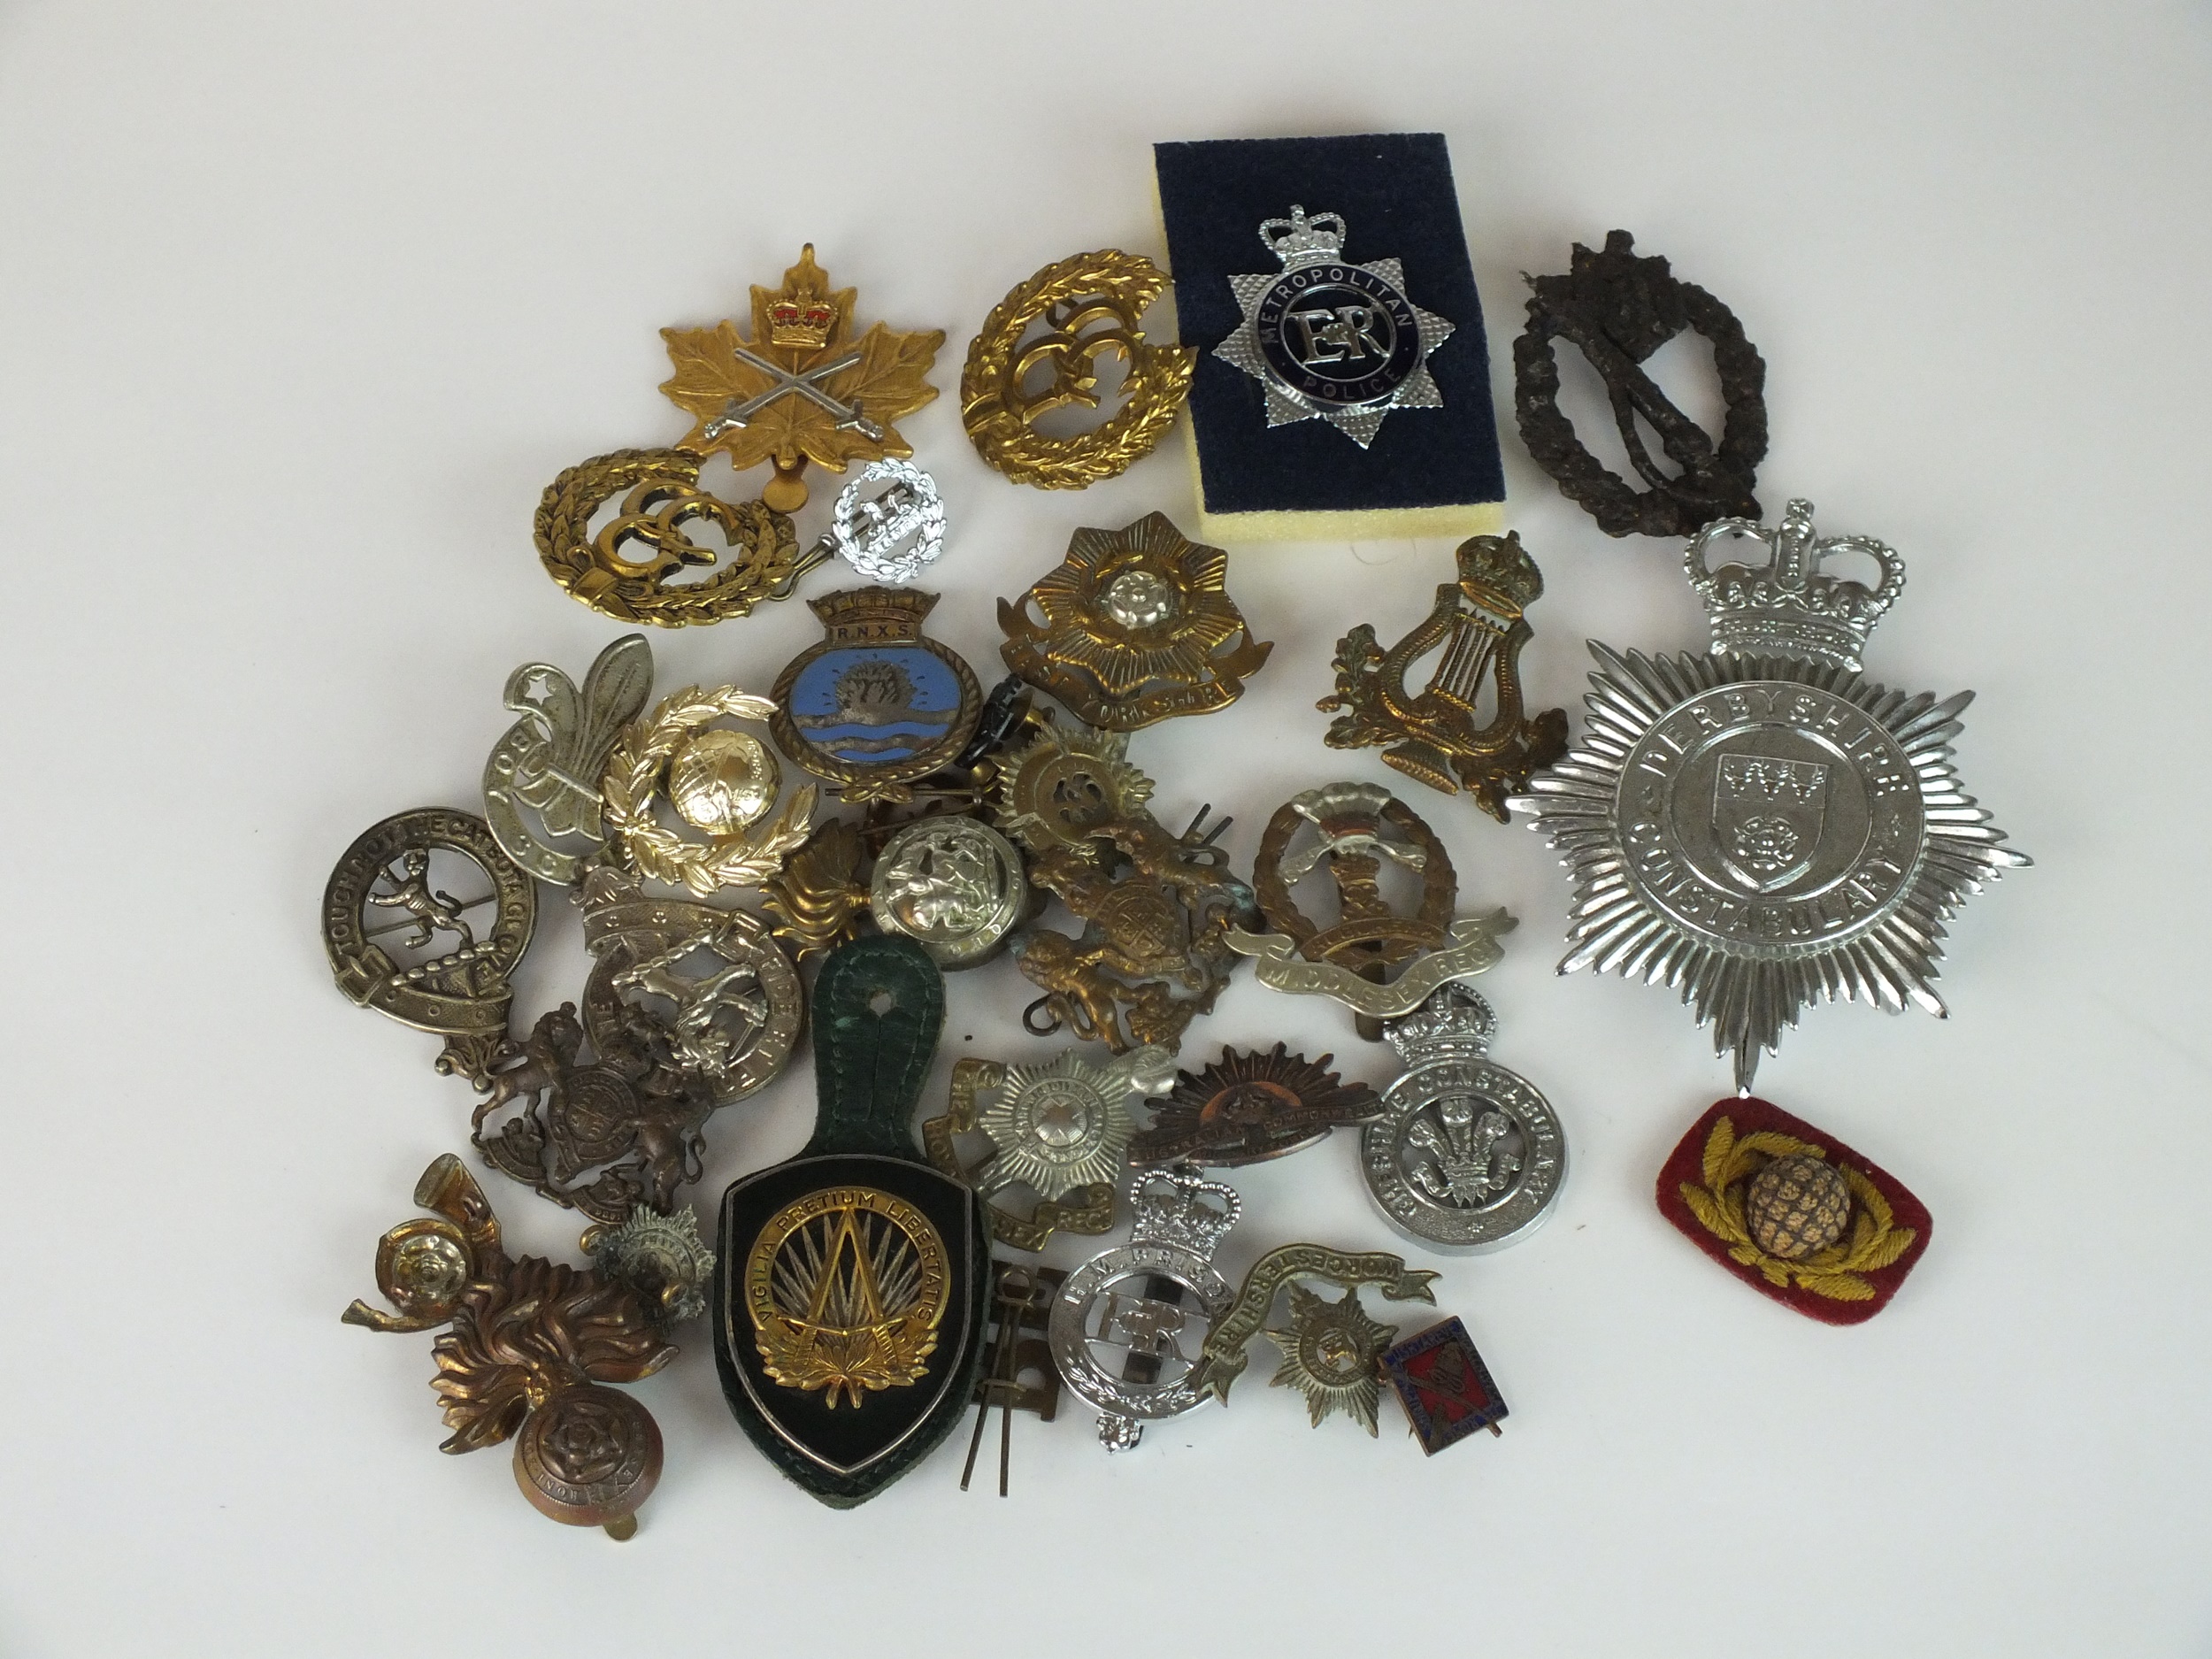 A collection of 30 assorted army, police, Scottish clan, boy scout, a relic WW2 German badge etc